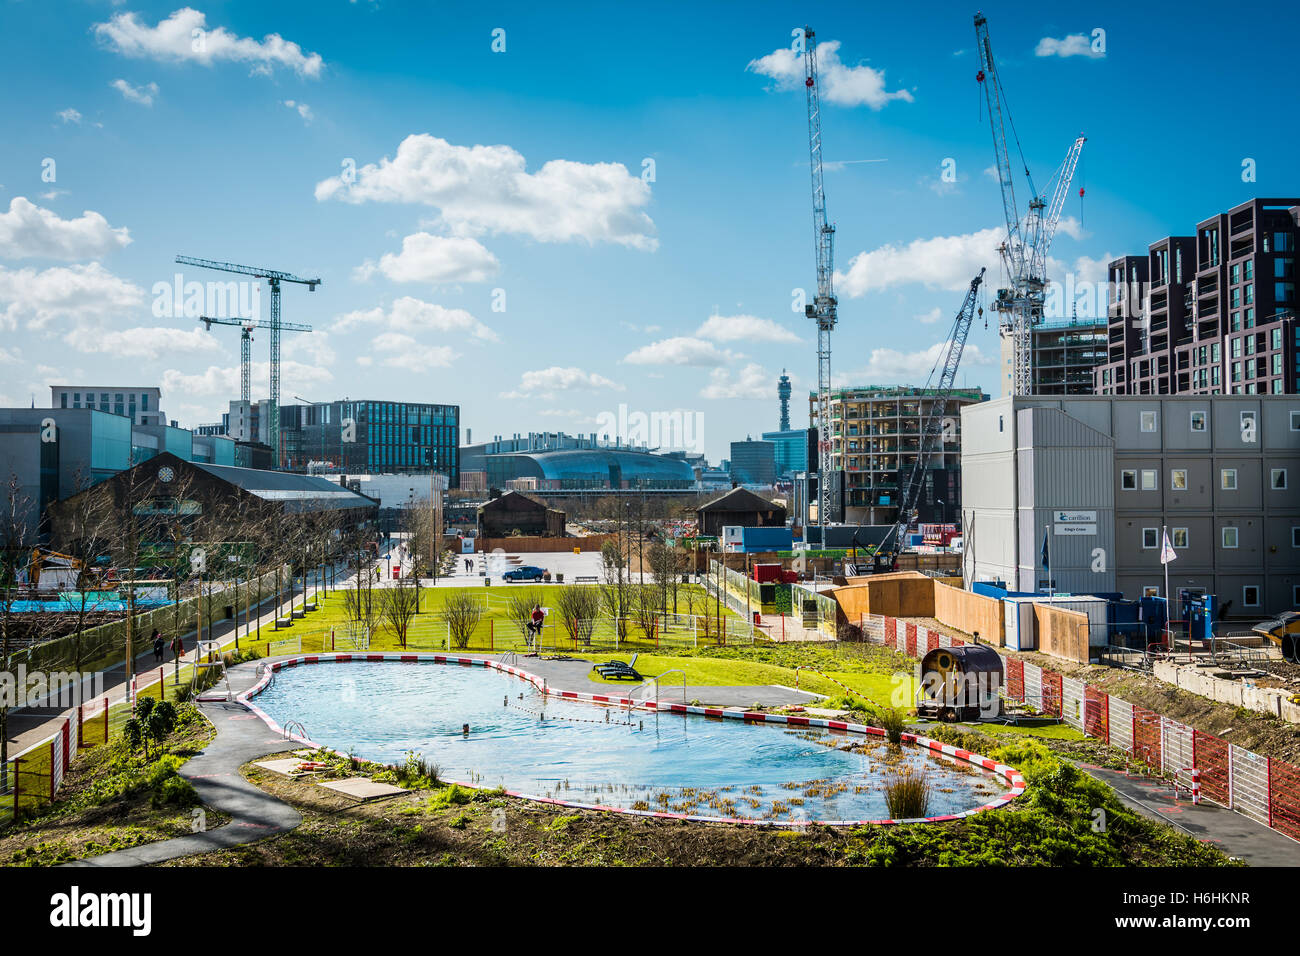 King's Cross Pond Club is the UK's first ever man-made fresh water public bathing pond. Stock Photo